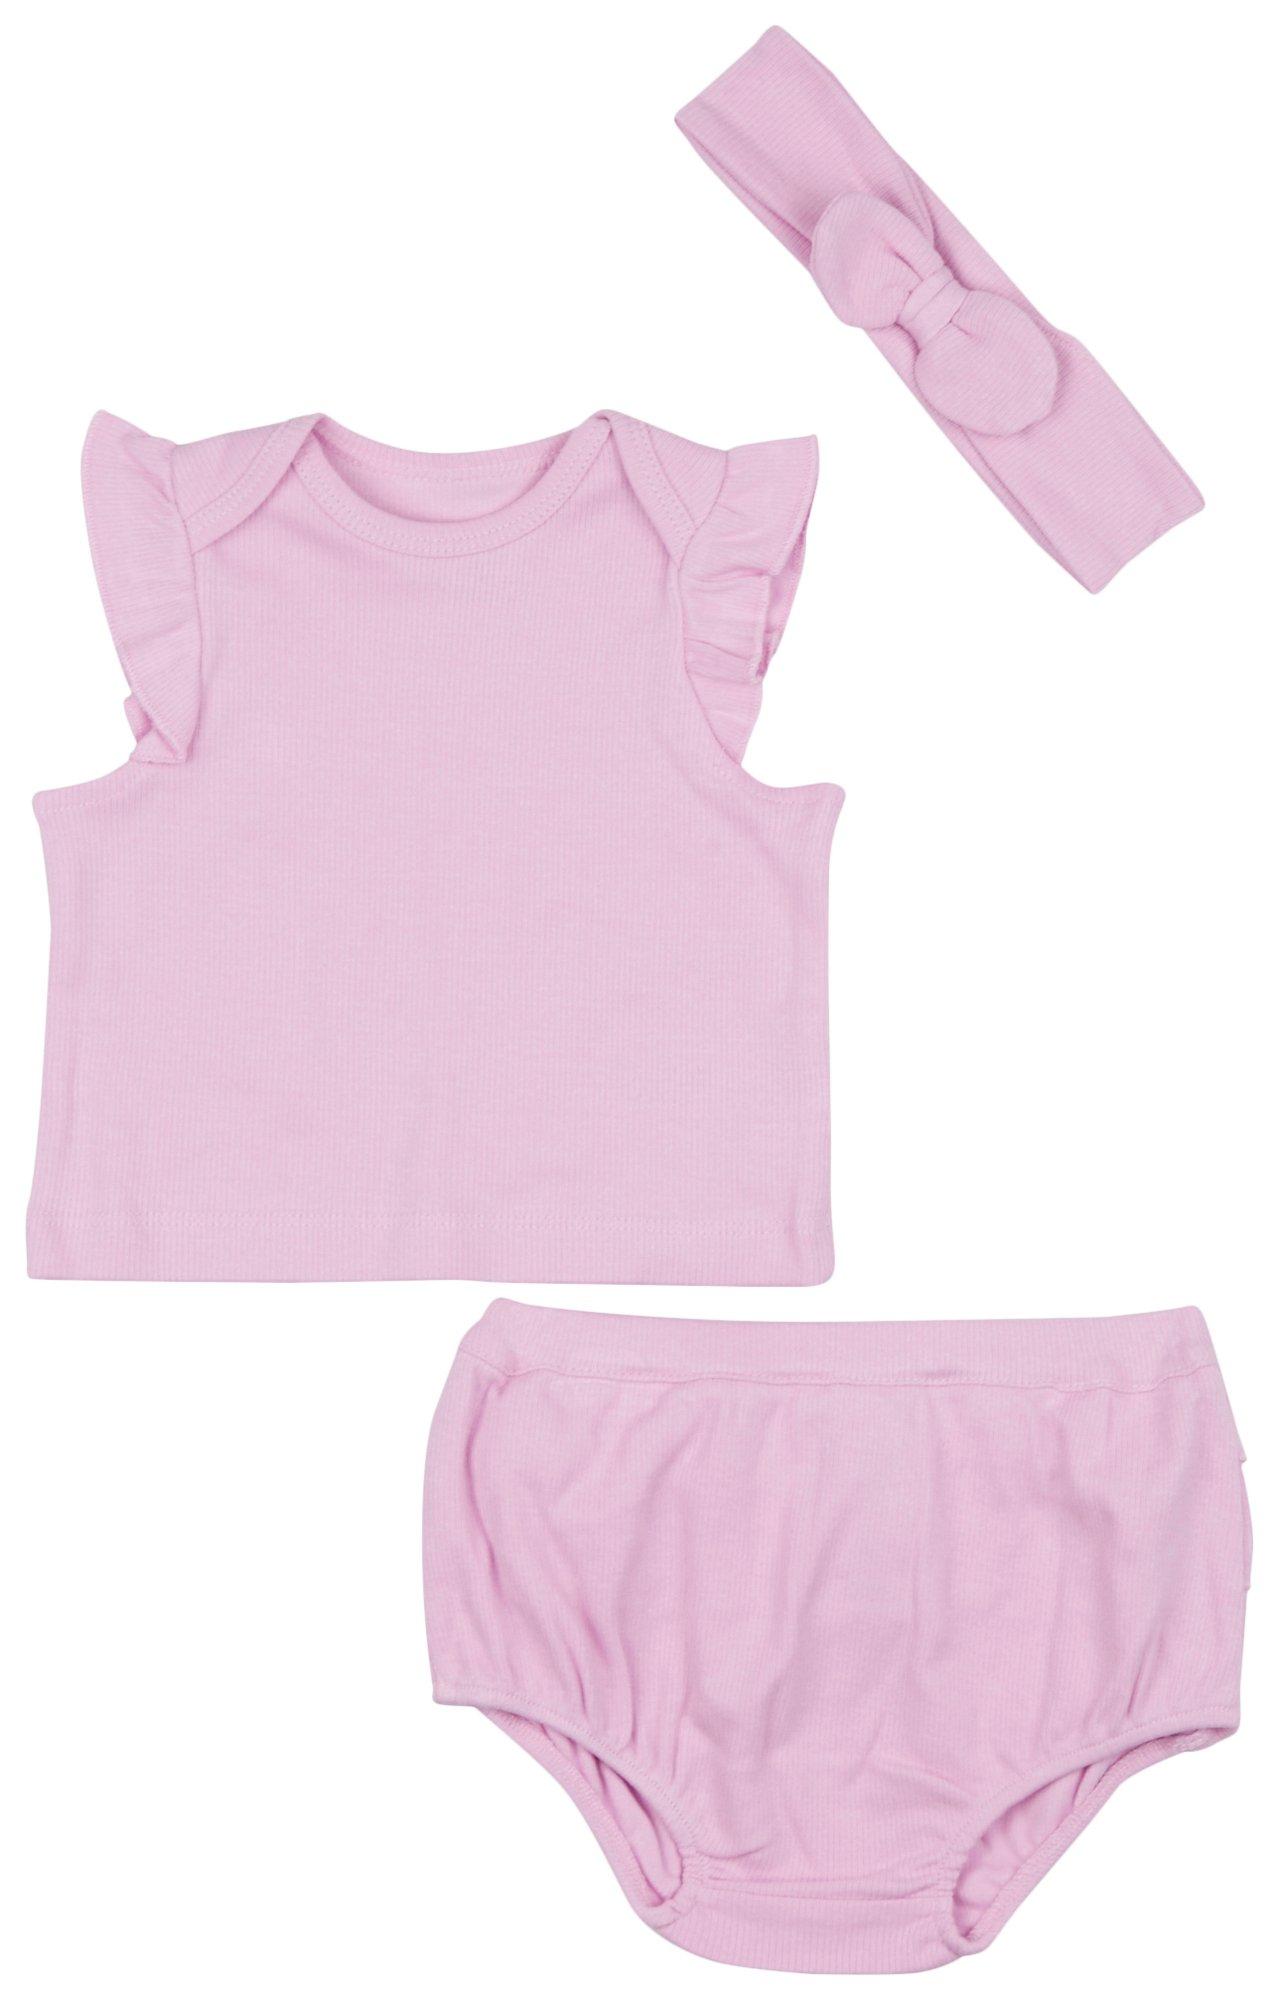 Little Me Baby Girls 3-pc. Lilac Knit Top